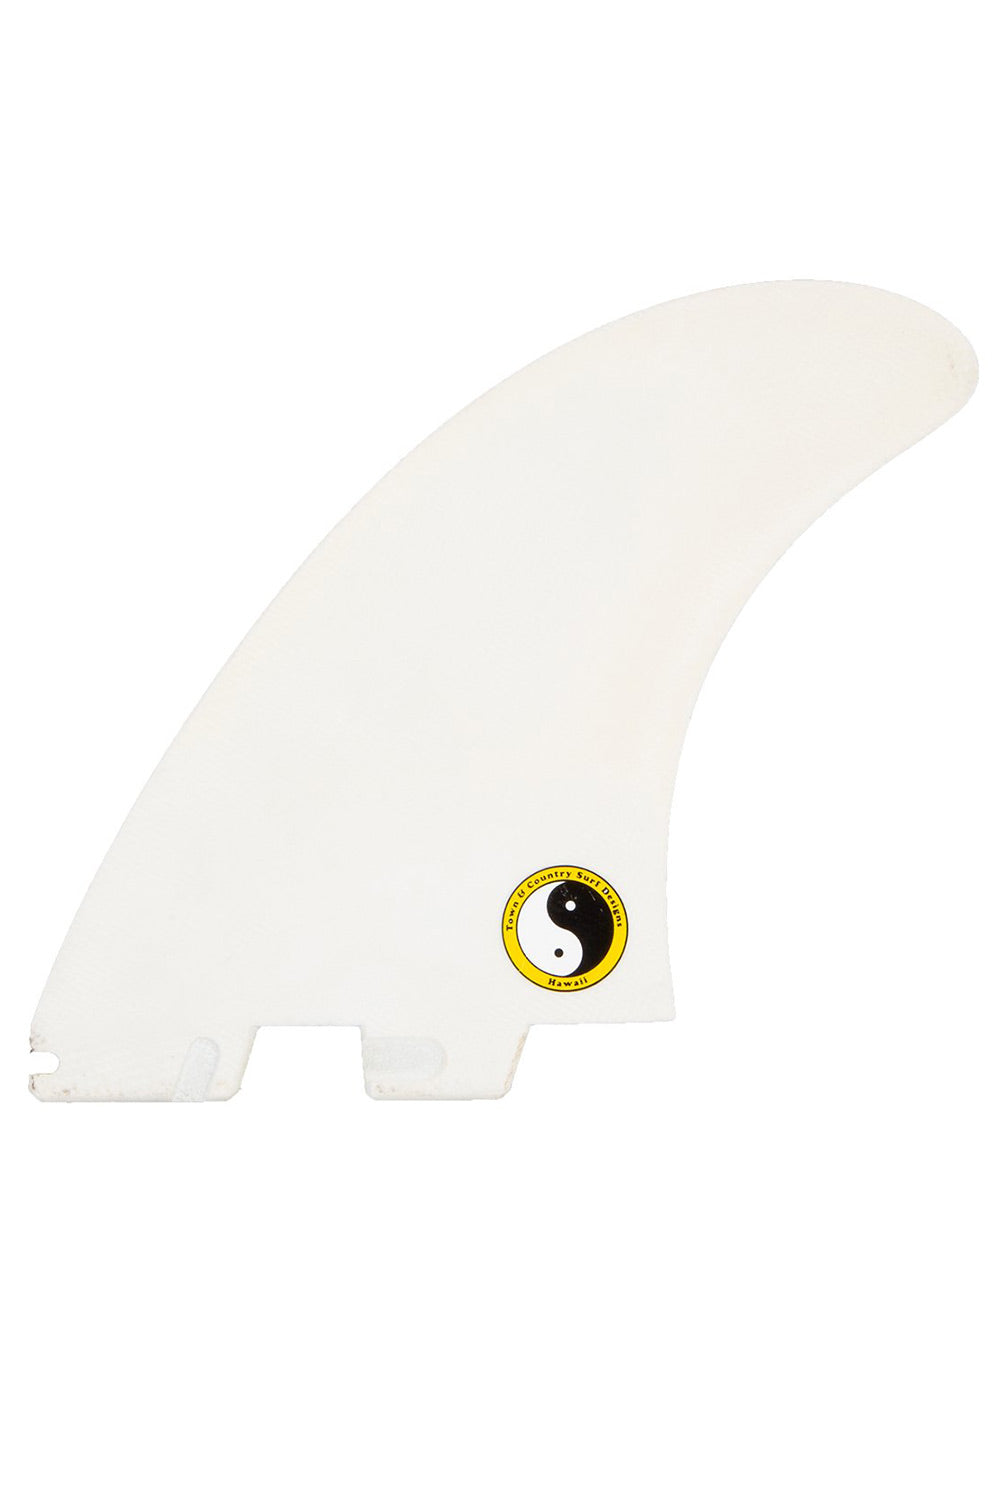 FCS 2 Town & Country PG Twin + 1 Fin Set